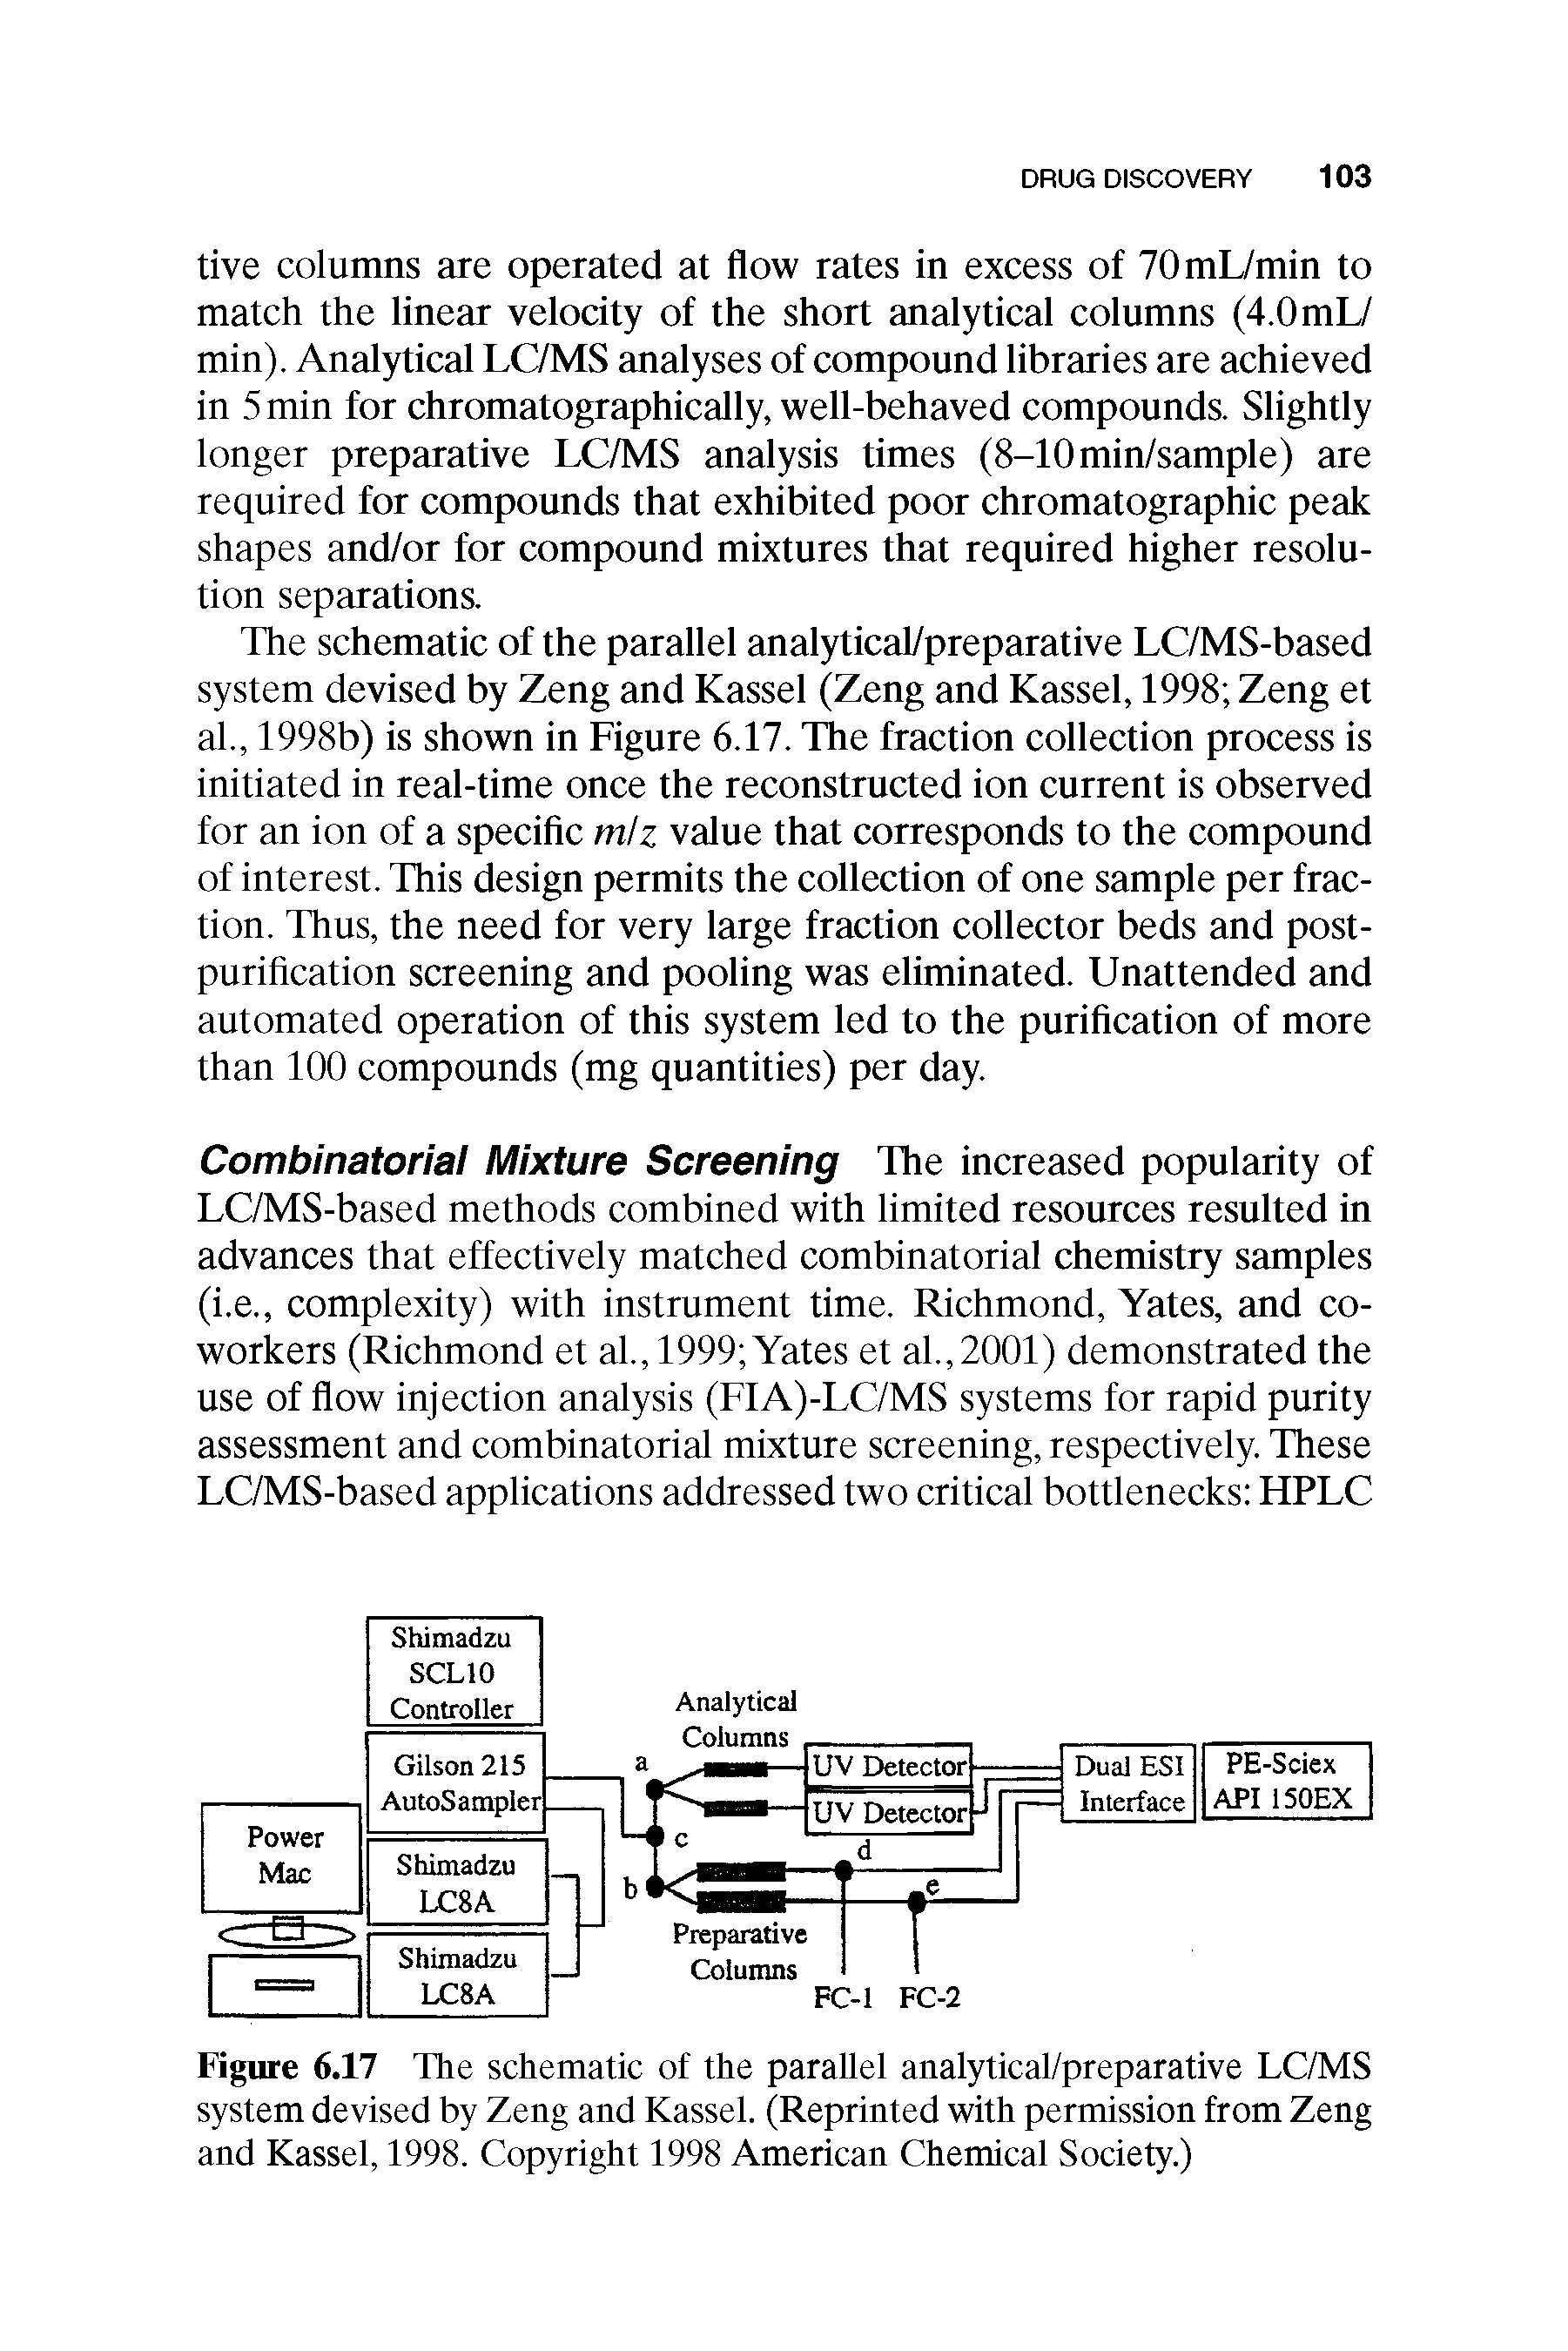 Figure 6.17 The schematic of the parallel analytical/preparative LC/MS system devised by Zeng and Kassel. (Reprinted with permission from Zeng and Kassel, 1998. Copyright 1998 American Chemical Society.)...